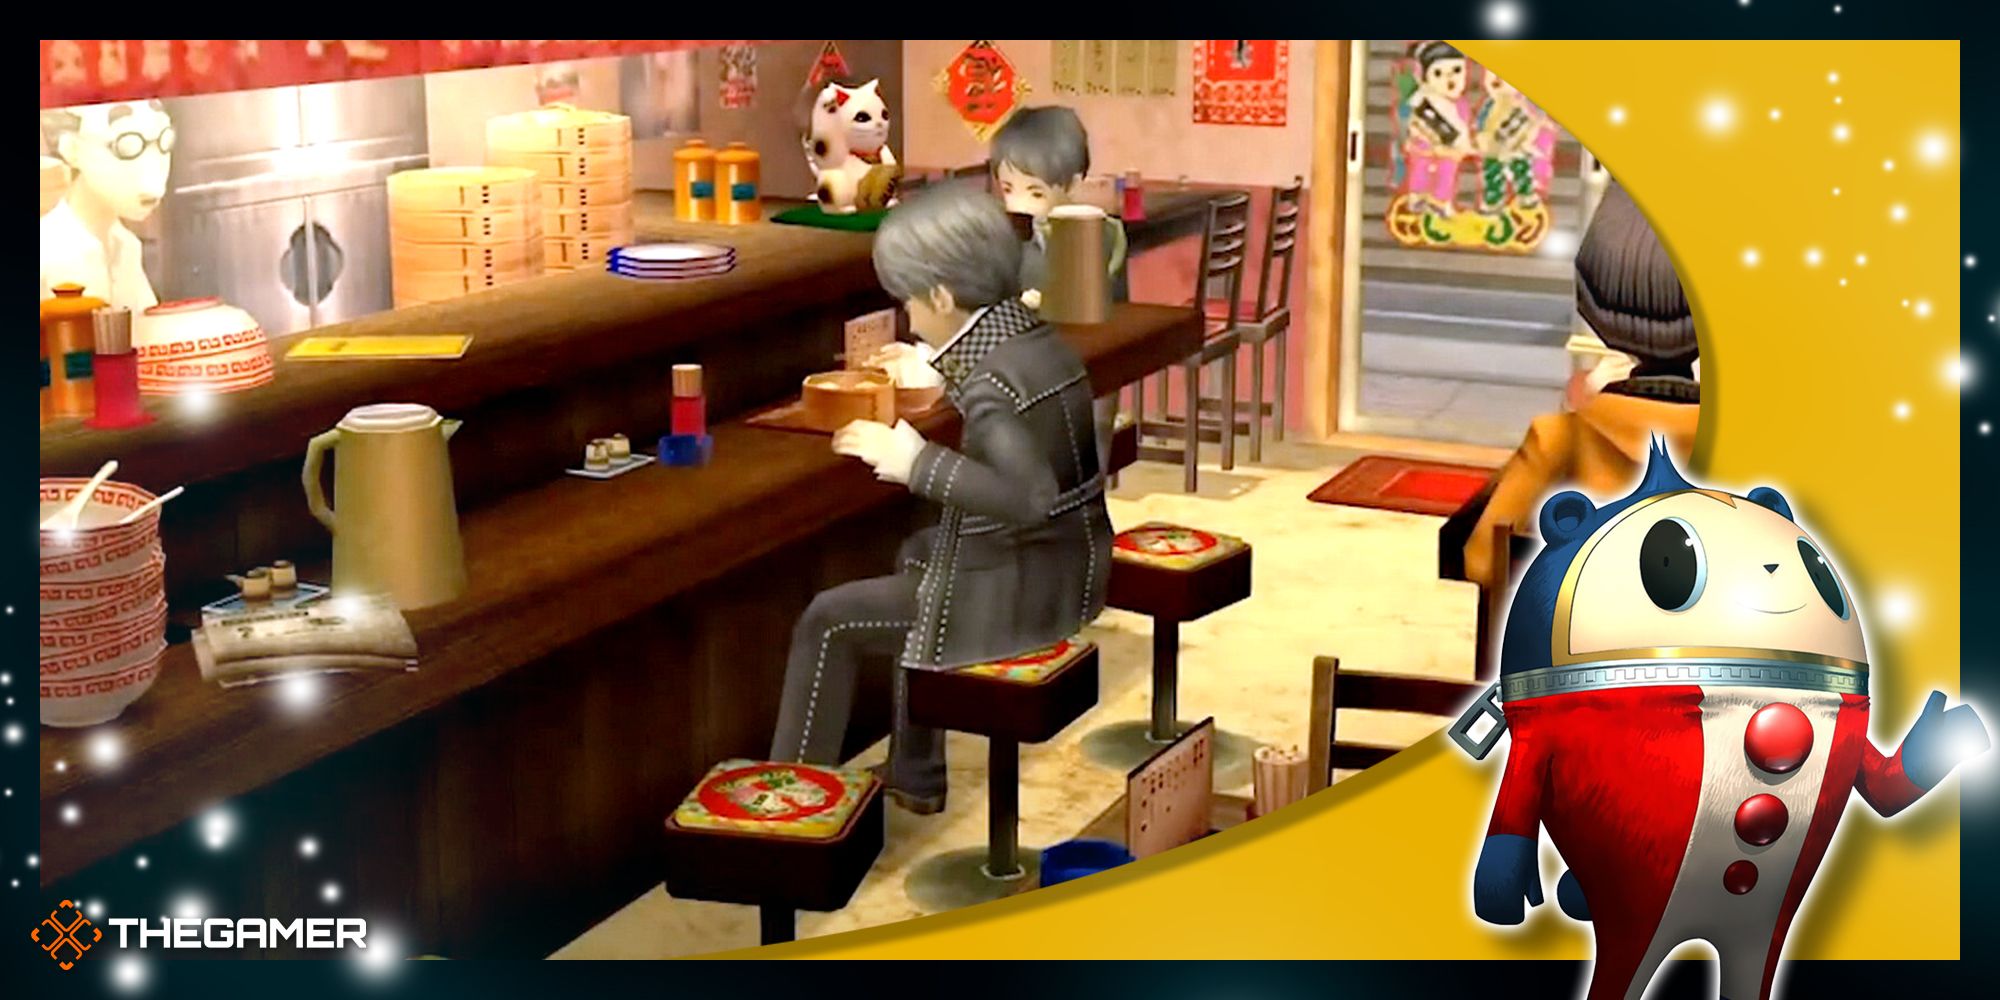 Persona 4 Golden - Yu eating Ramen in the cafe with a Teddie overlay in the corner.